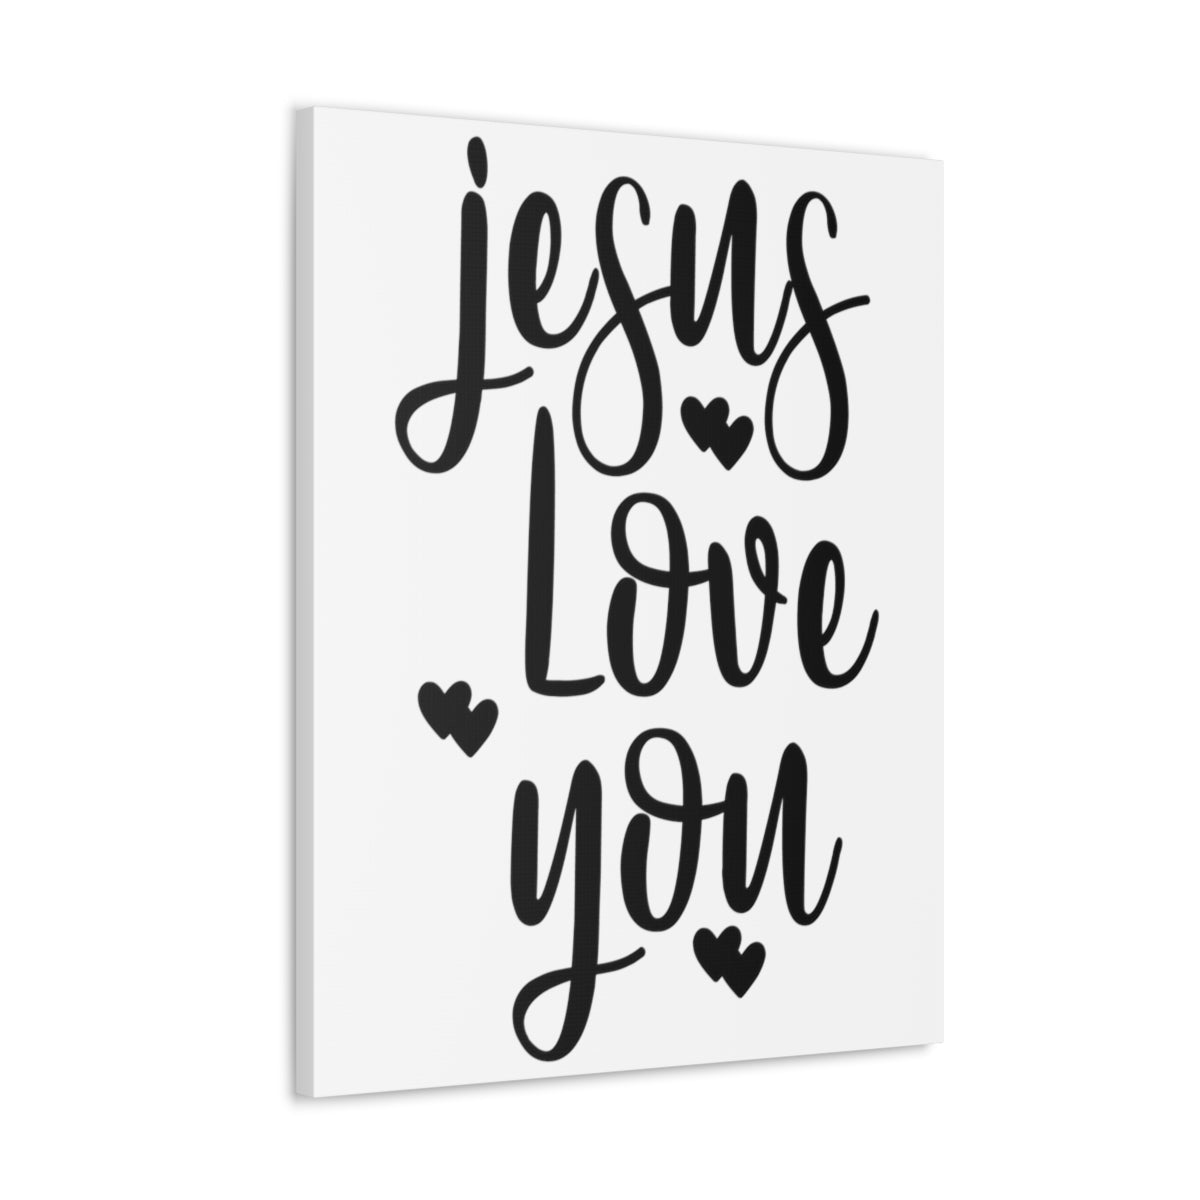 Scripture Walls Jesus Loves You 1 John 4:18 Christian Wall Art Print Ready to Hang Unframed-Express Your Love Gifts